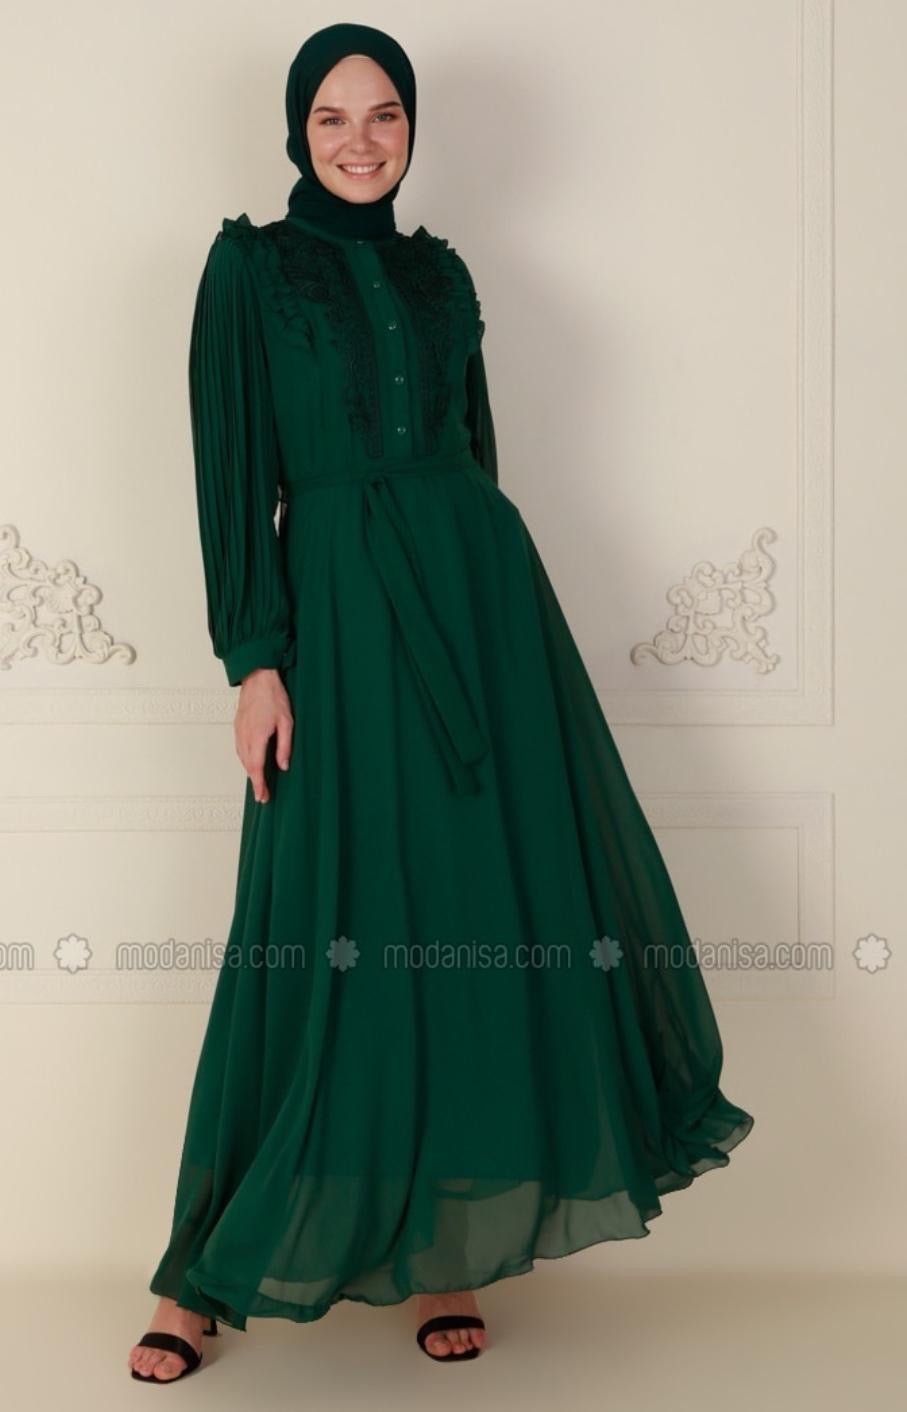 Fully Lined Chiffon Belted Dress